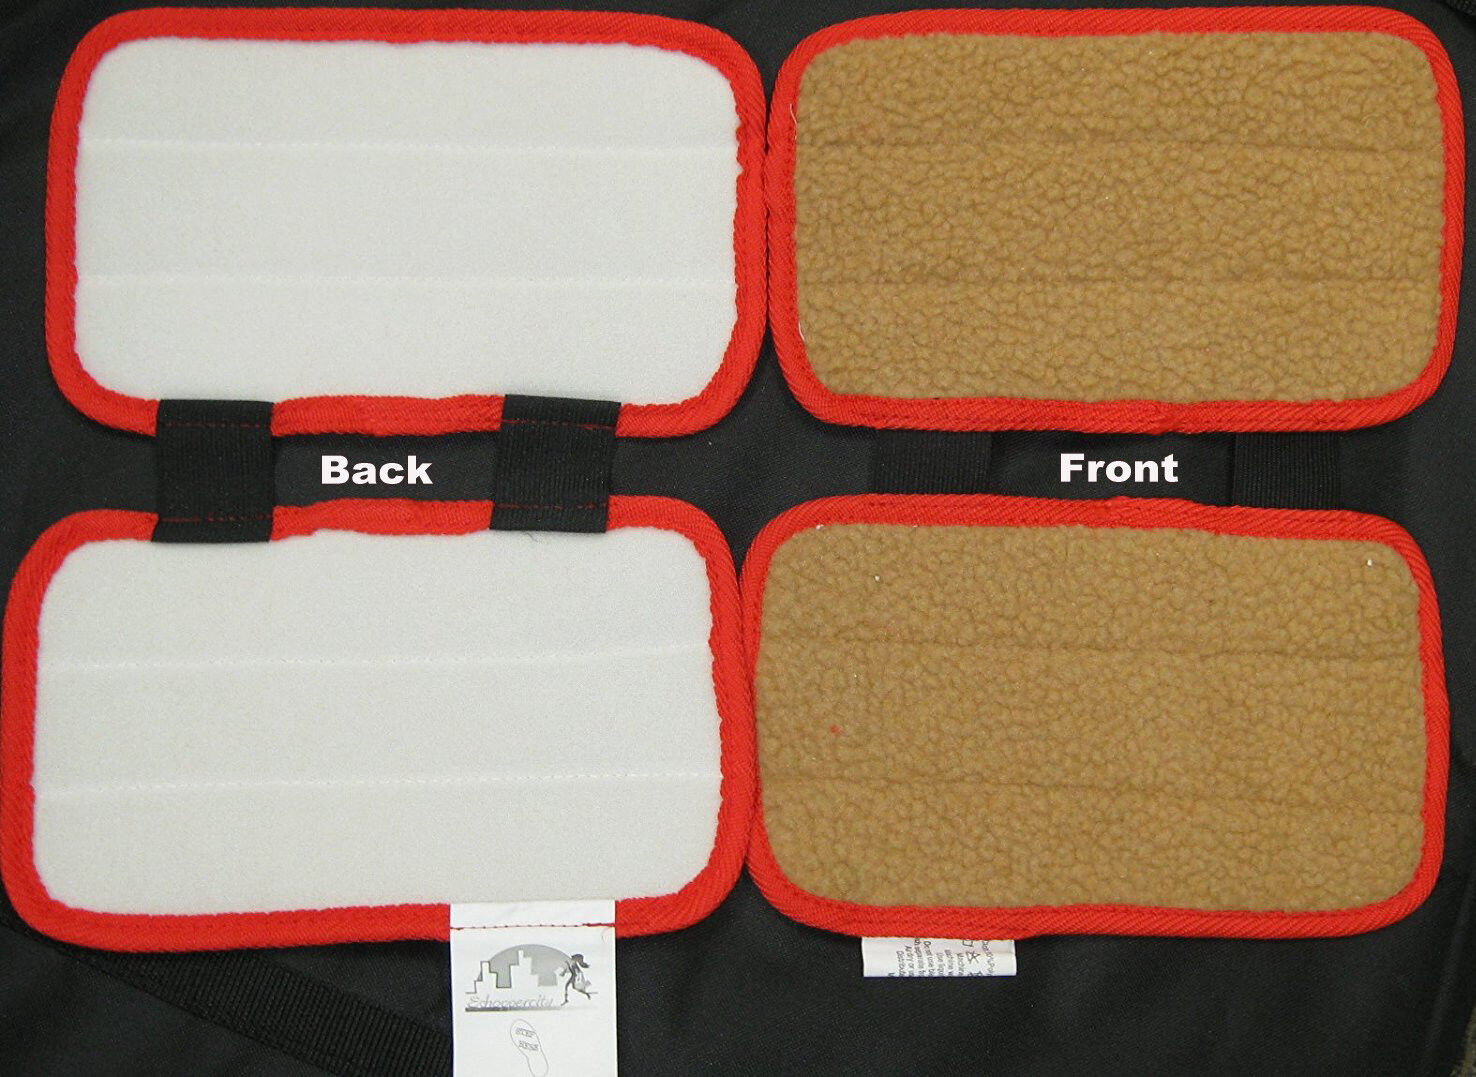 Max 45% OFF 2 Pack Seattle Mall Replacement Pad wood and Sh pad floor polishing For hard